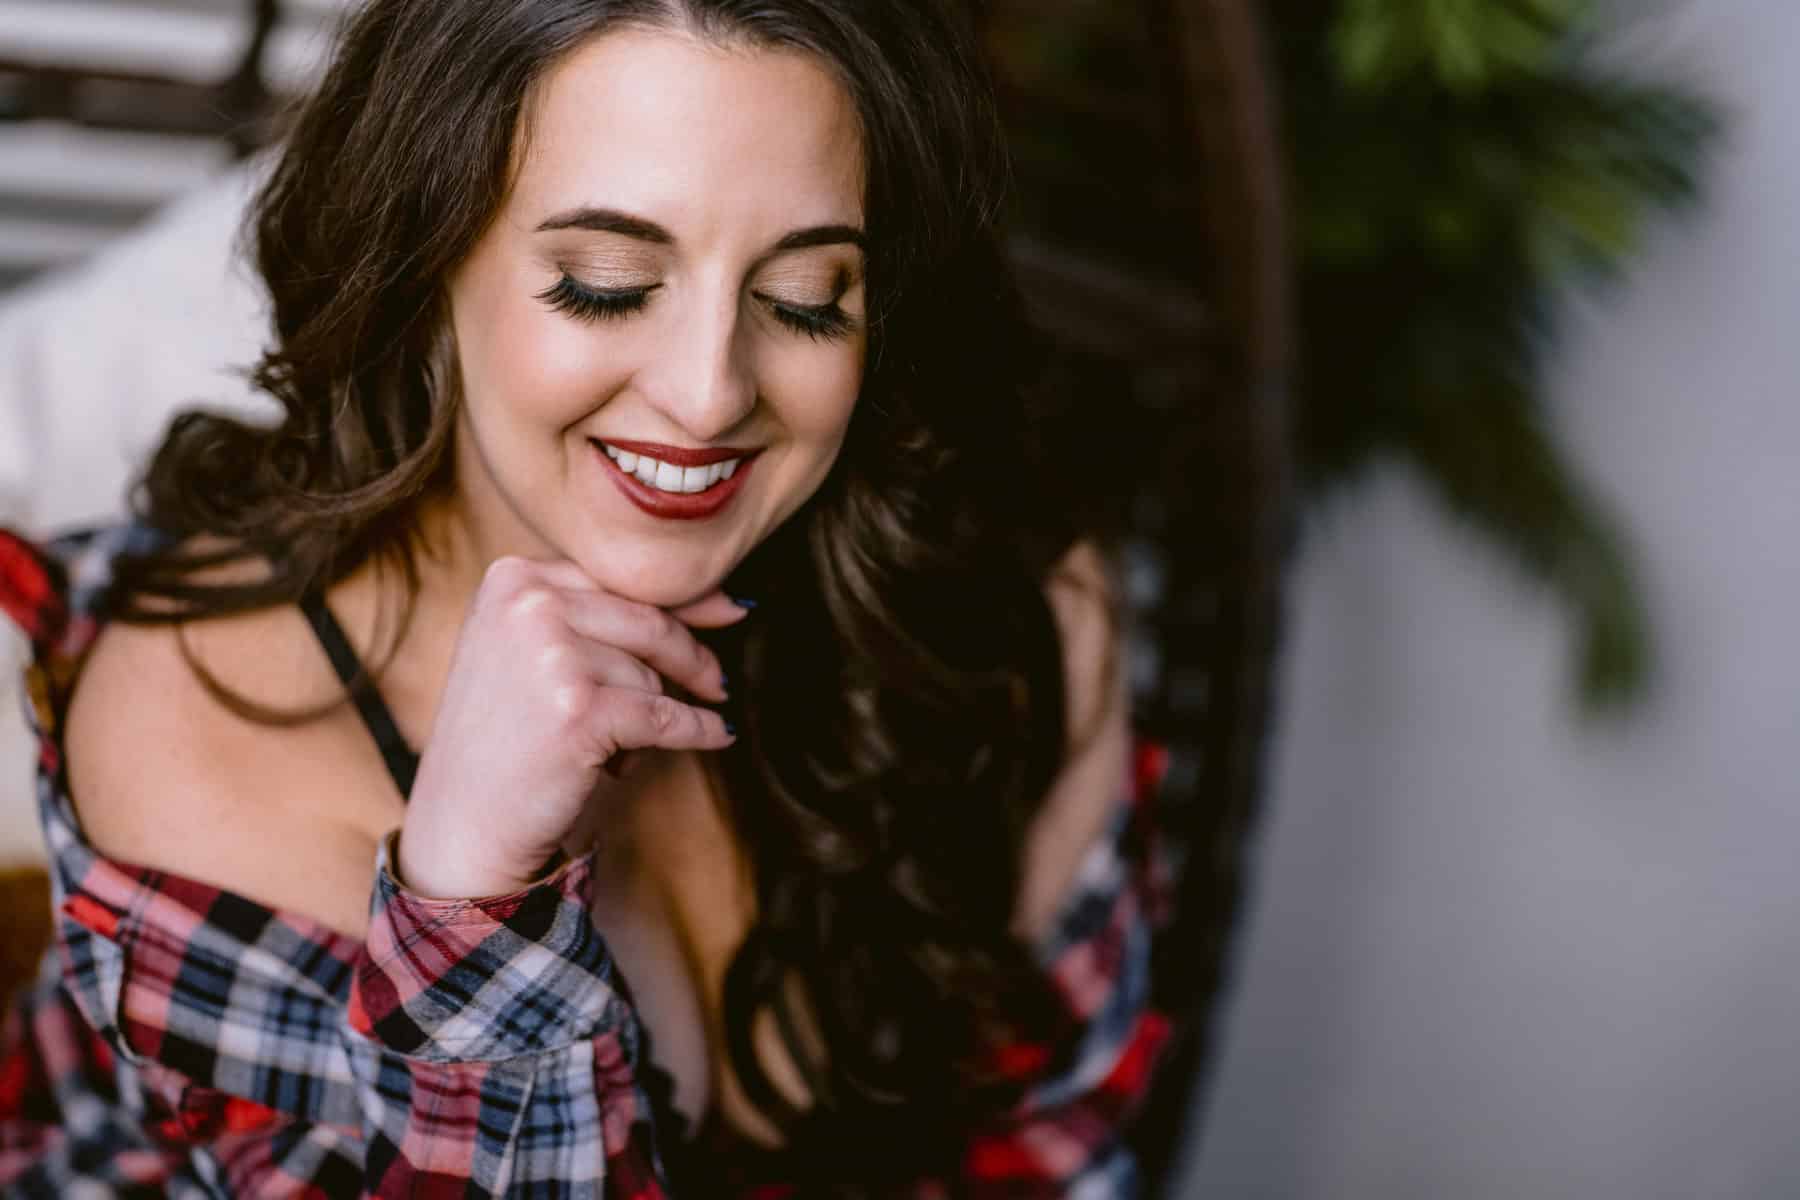 Photo of woman glancing down and smiling with her hand below her chin, in fiance's plaid shirt falling off shoulders